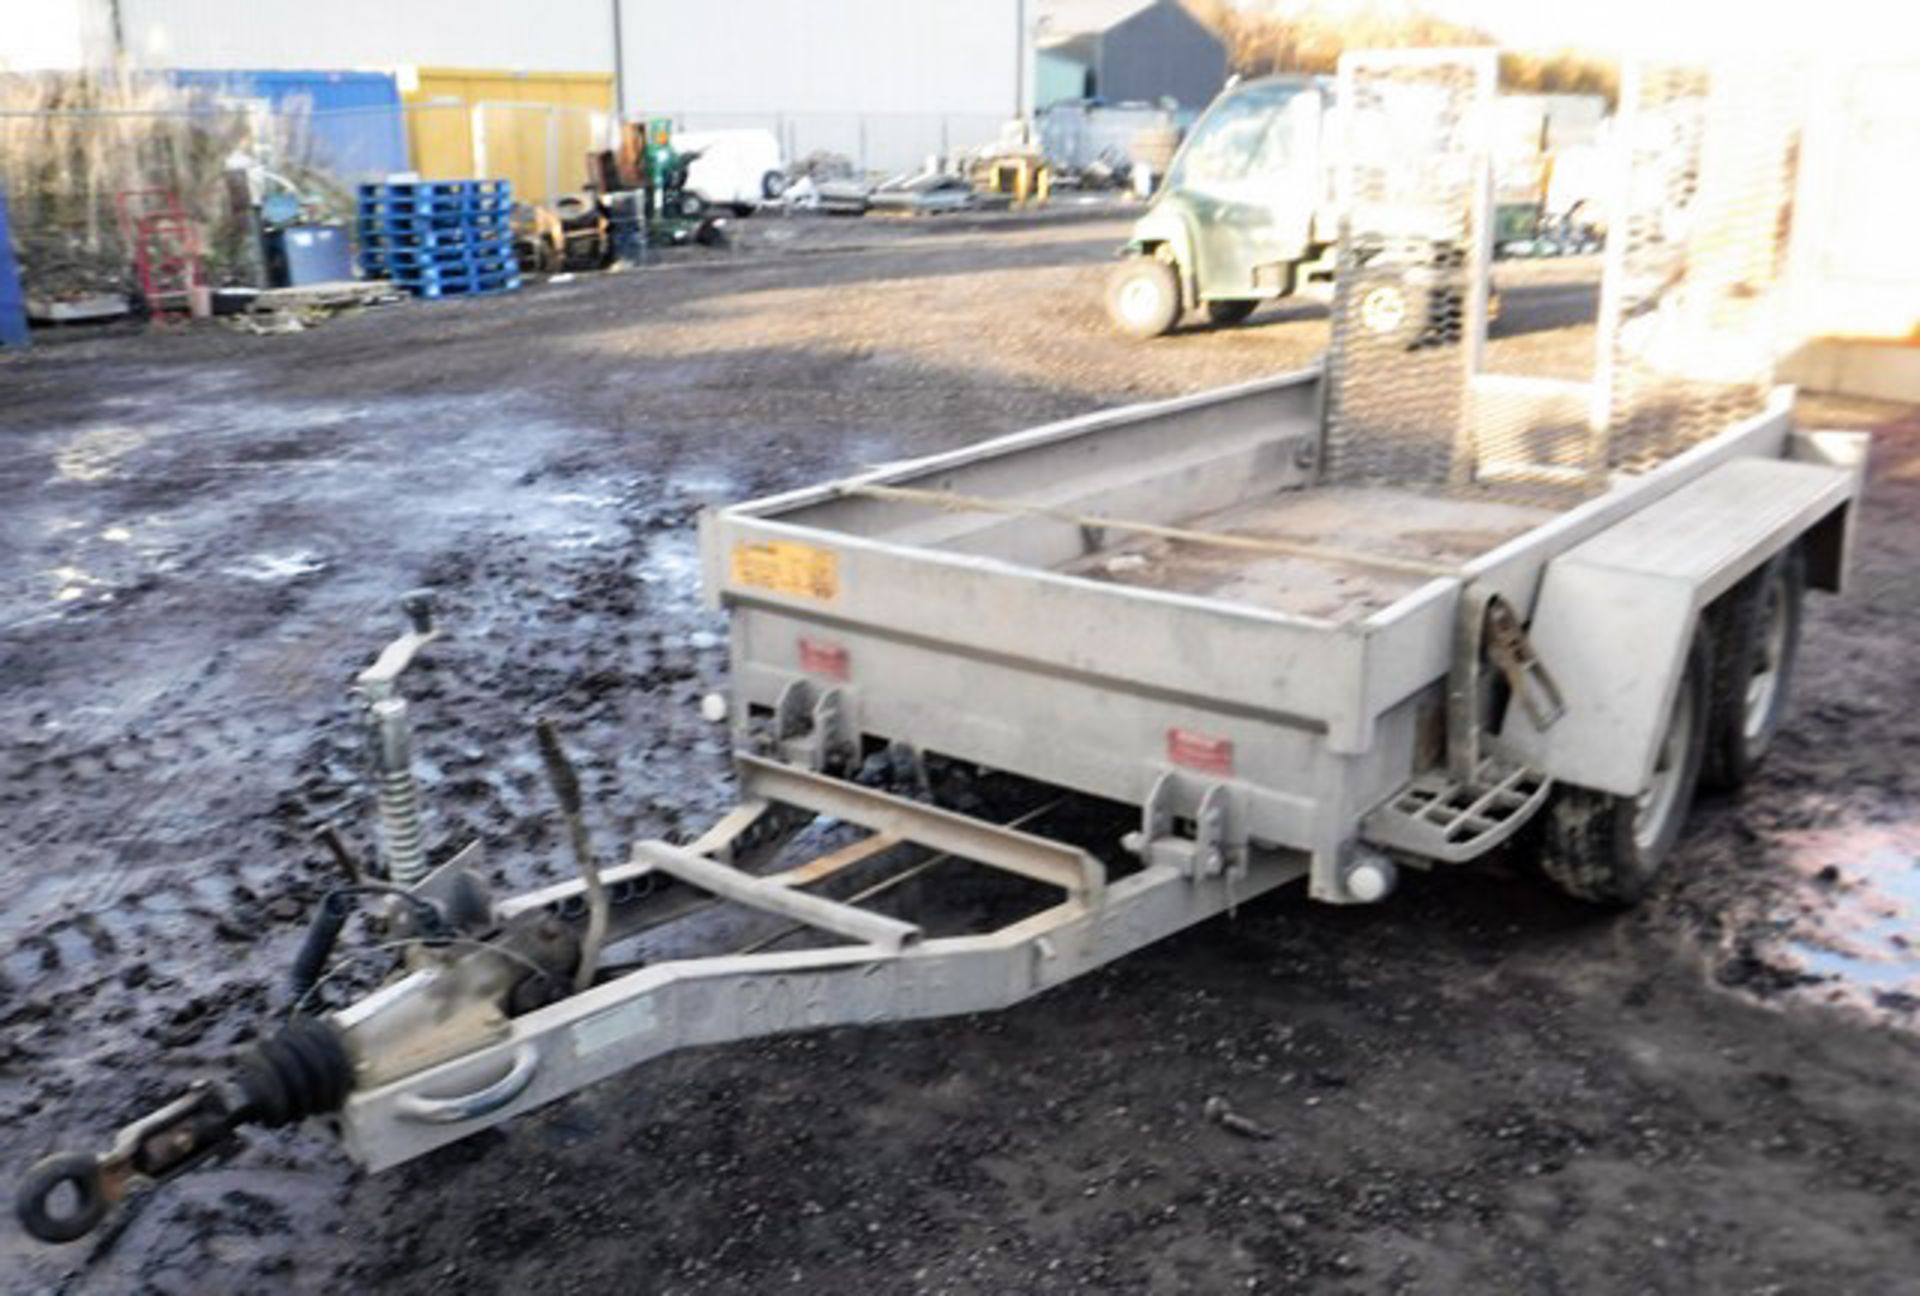 INDESPENSION 8' X 4' PLANT TRAILER, TWIN AXLE, S/N SDHG20840GG077046, GROSS TRAILER WEIGHT - 2600, A